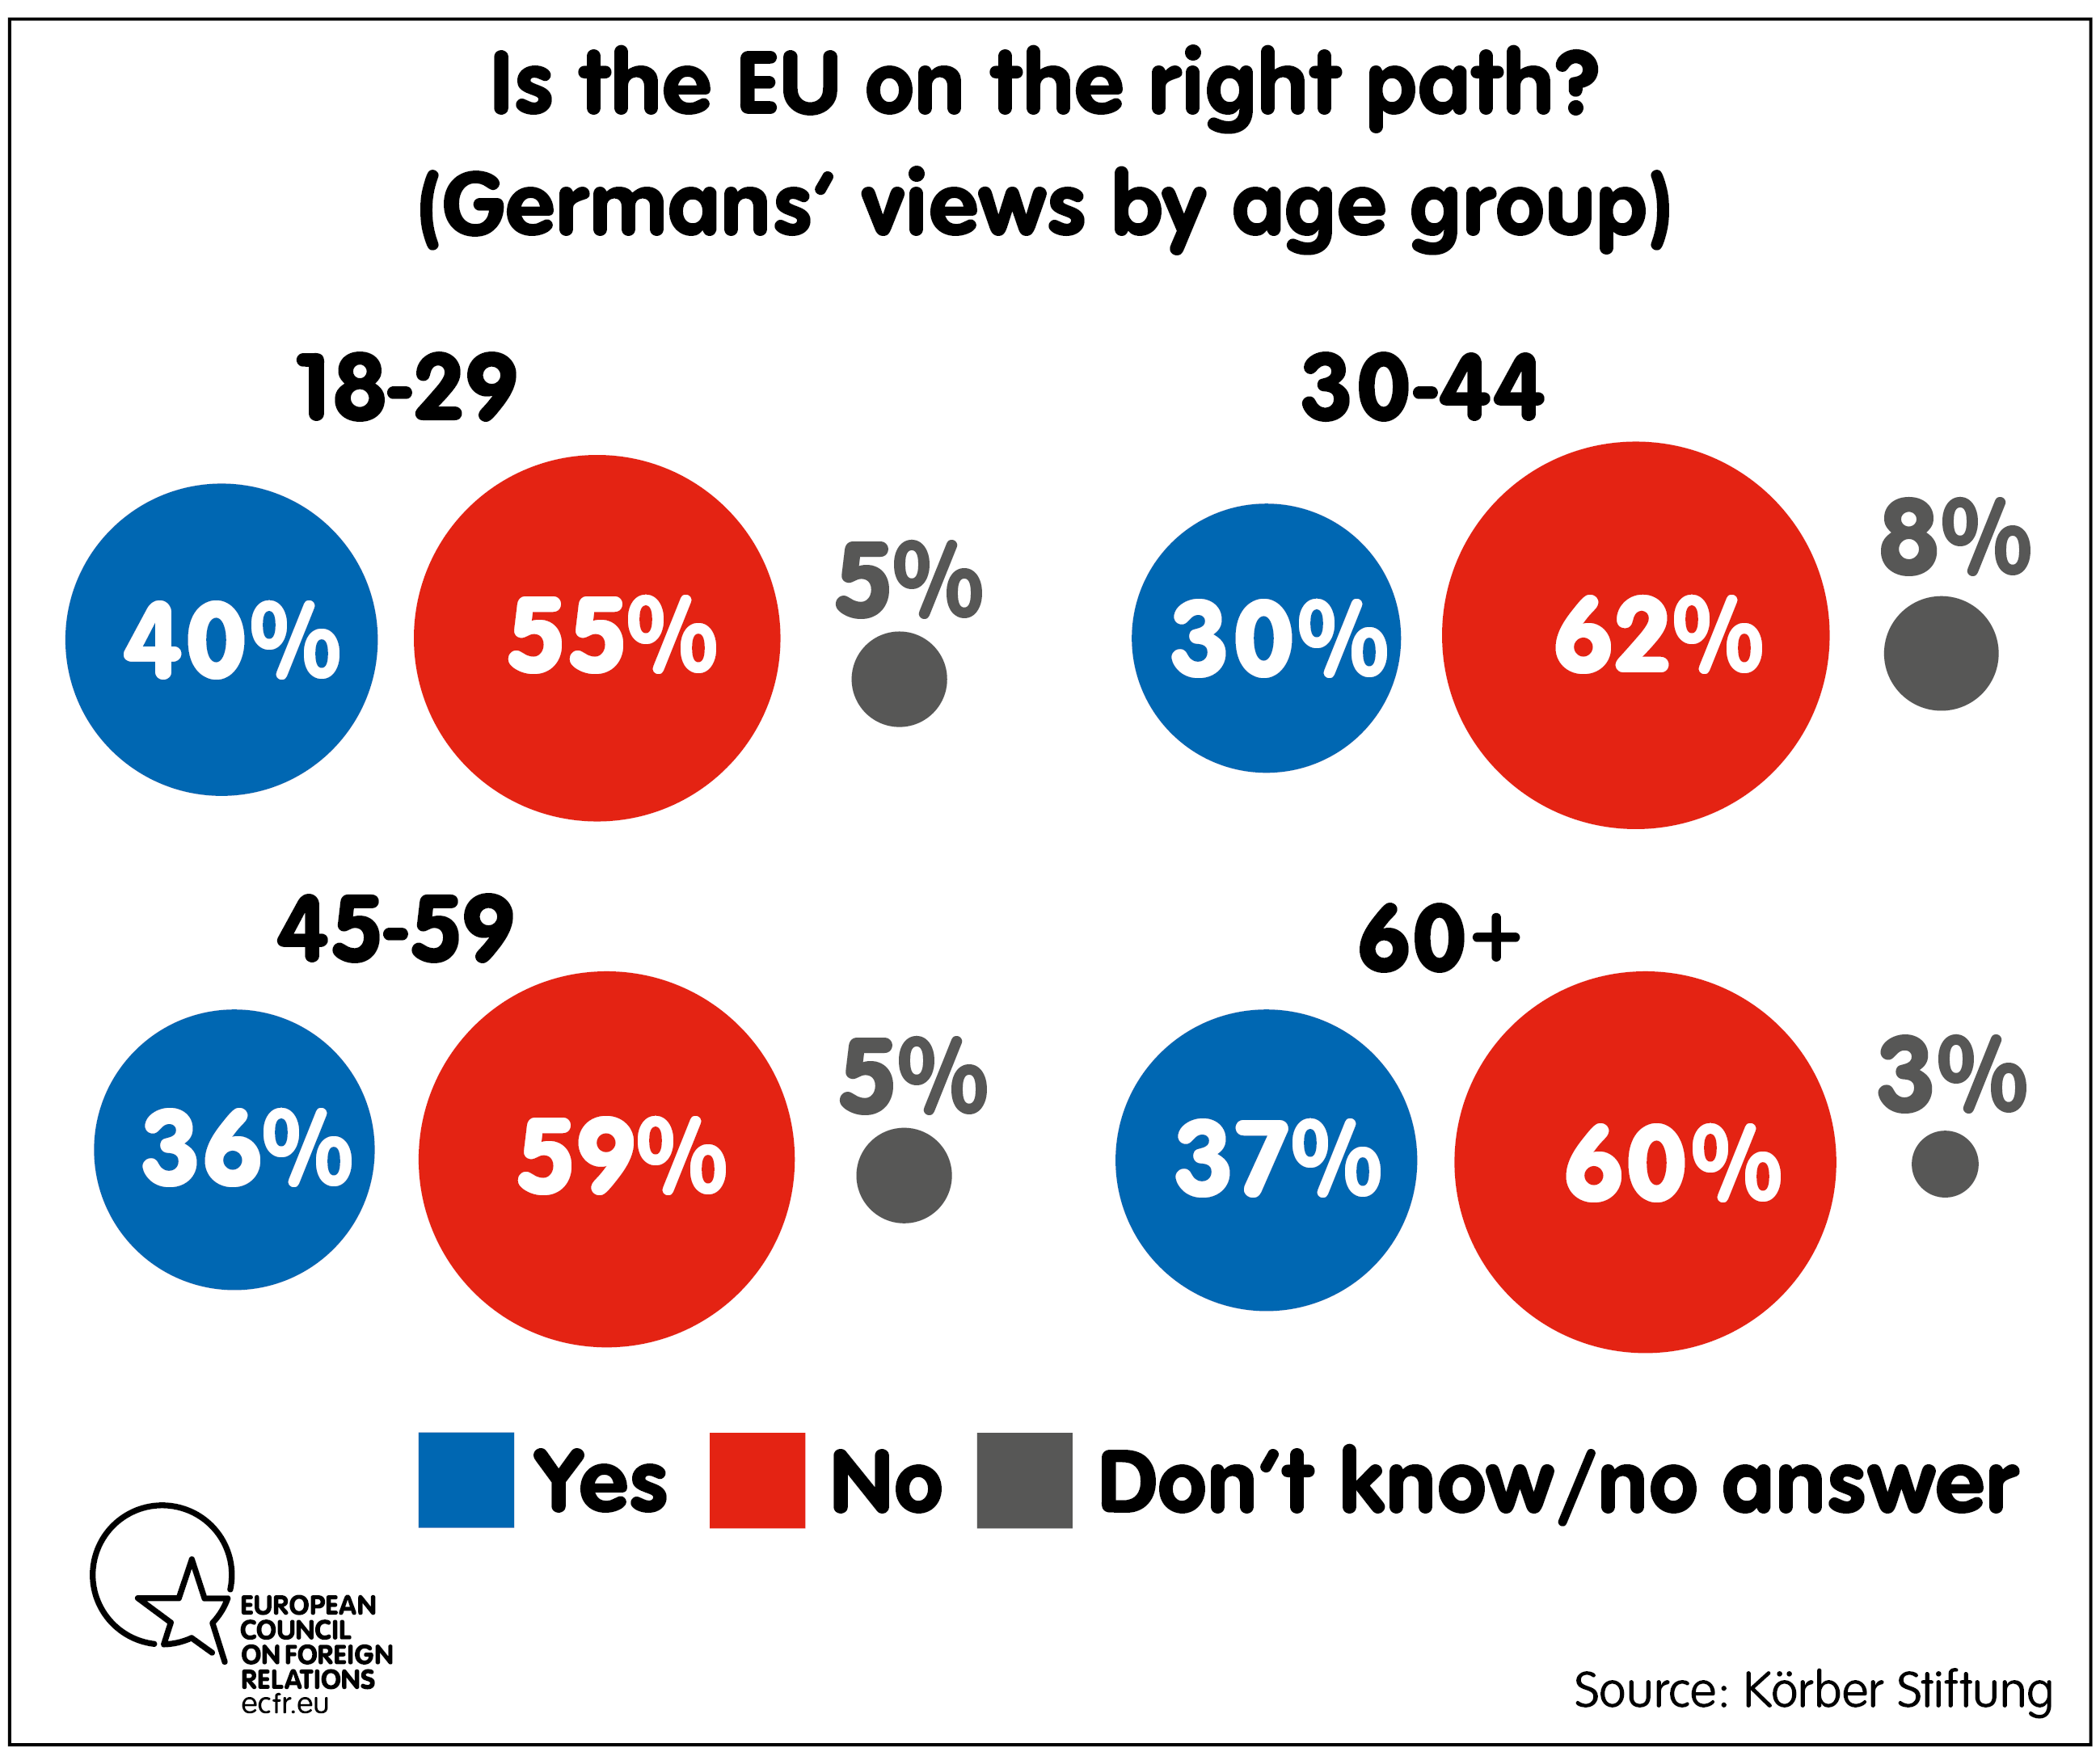 Is the EU on the right path? By age group